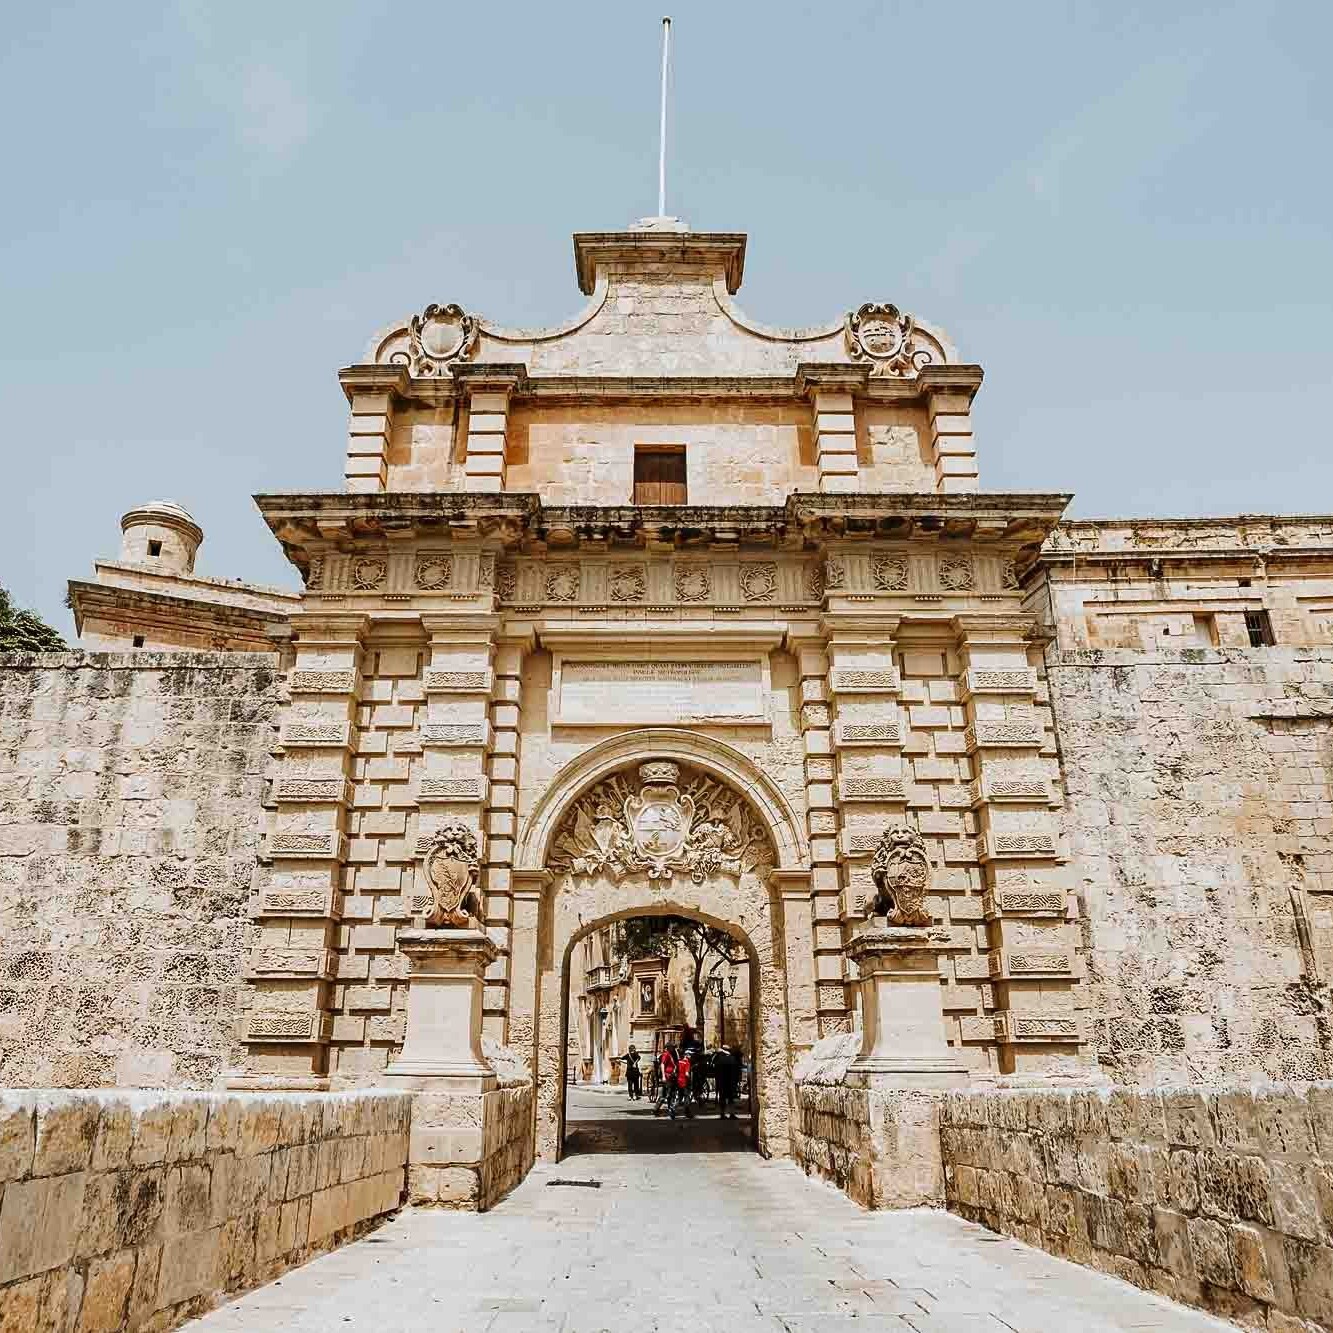 Entrance to the Mdina with medieval architecture on a Malta weekend break on a 2 days in Malta itinerary